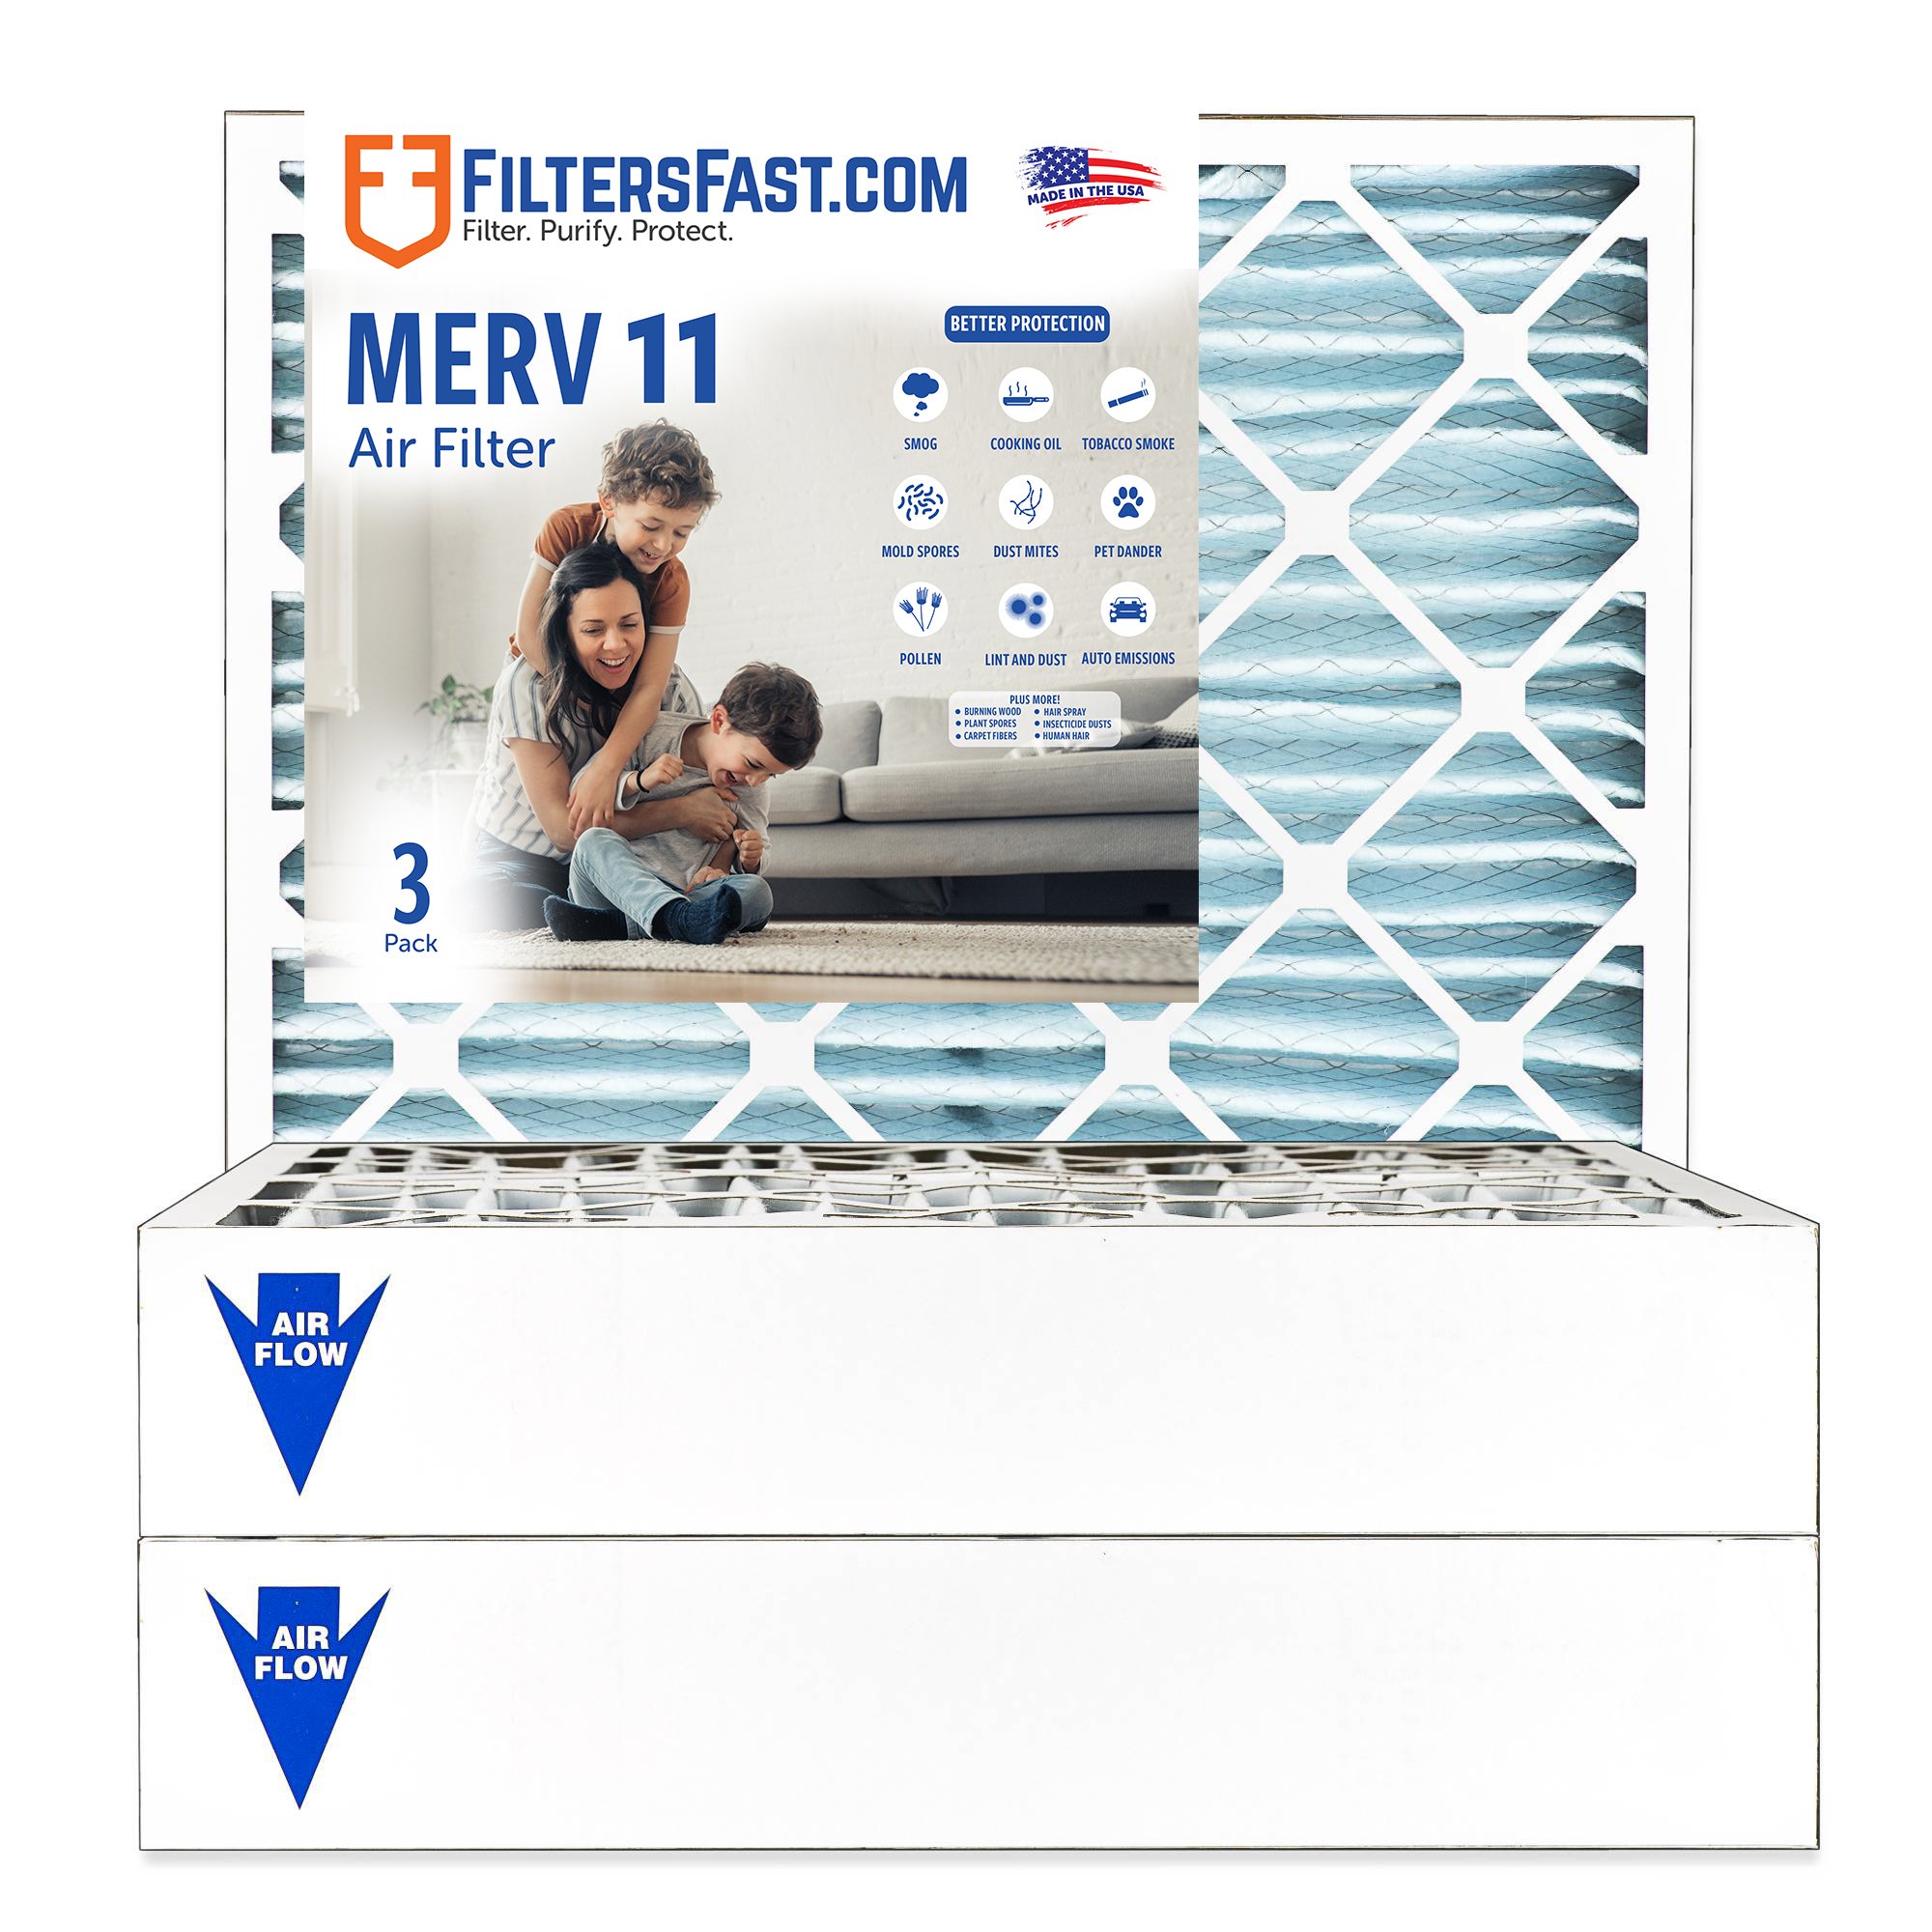 4" MERV 11 Furnace & AC Air Filter by Filters Fast&reg; - 3-Pack